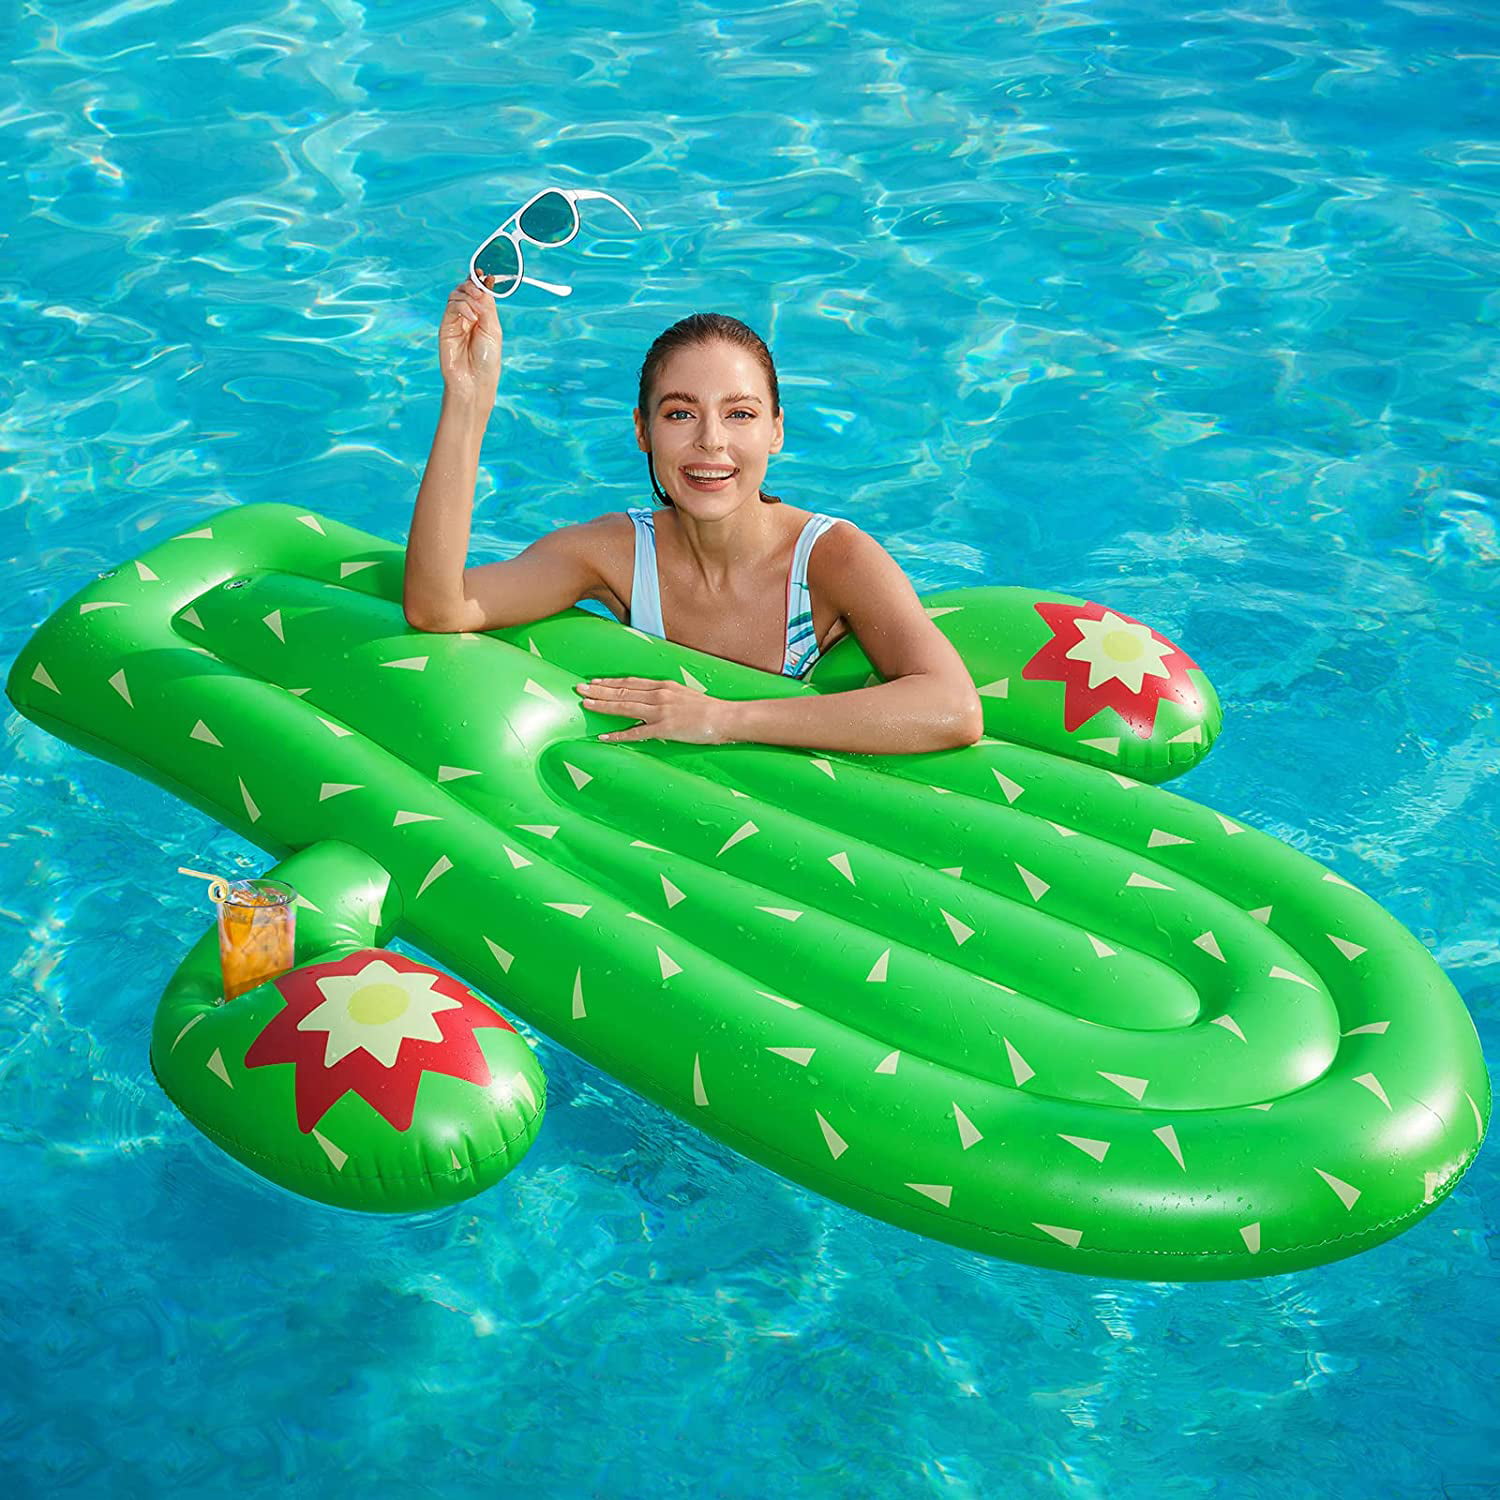 Green Cactus Inflatable Drink Cup Holder Hot Tub Swimming Pool Beach Party 